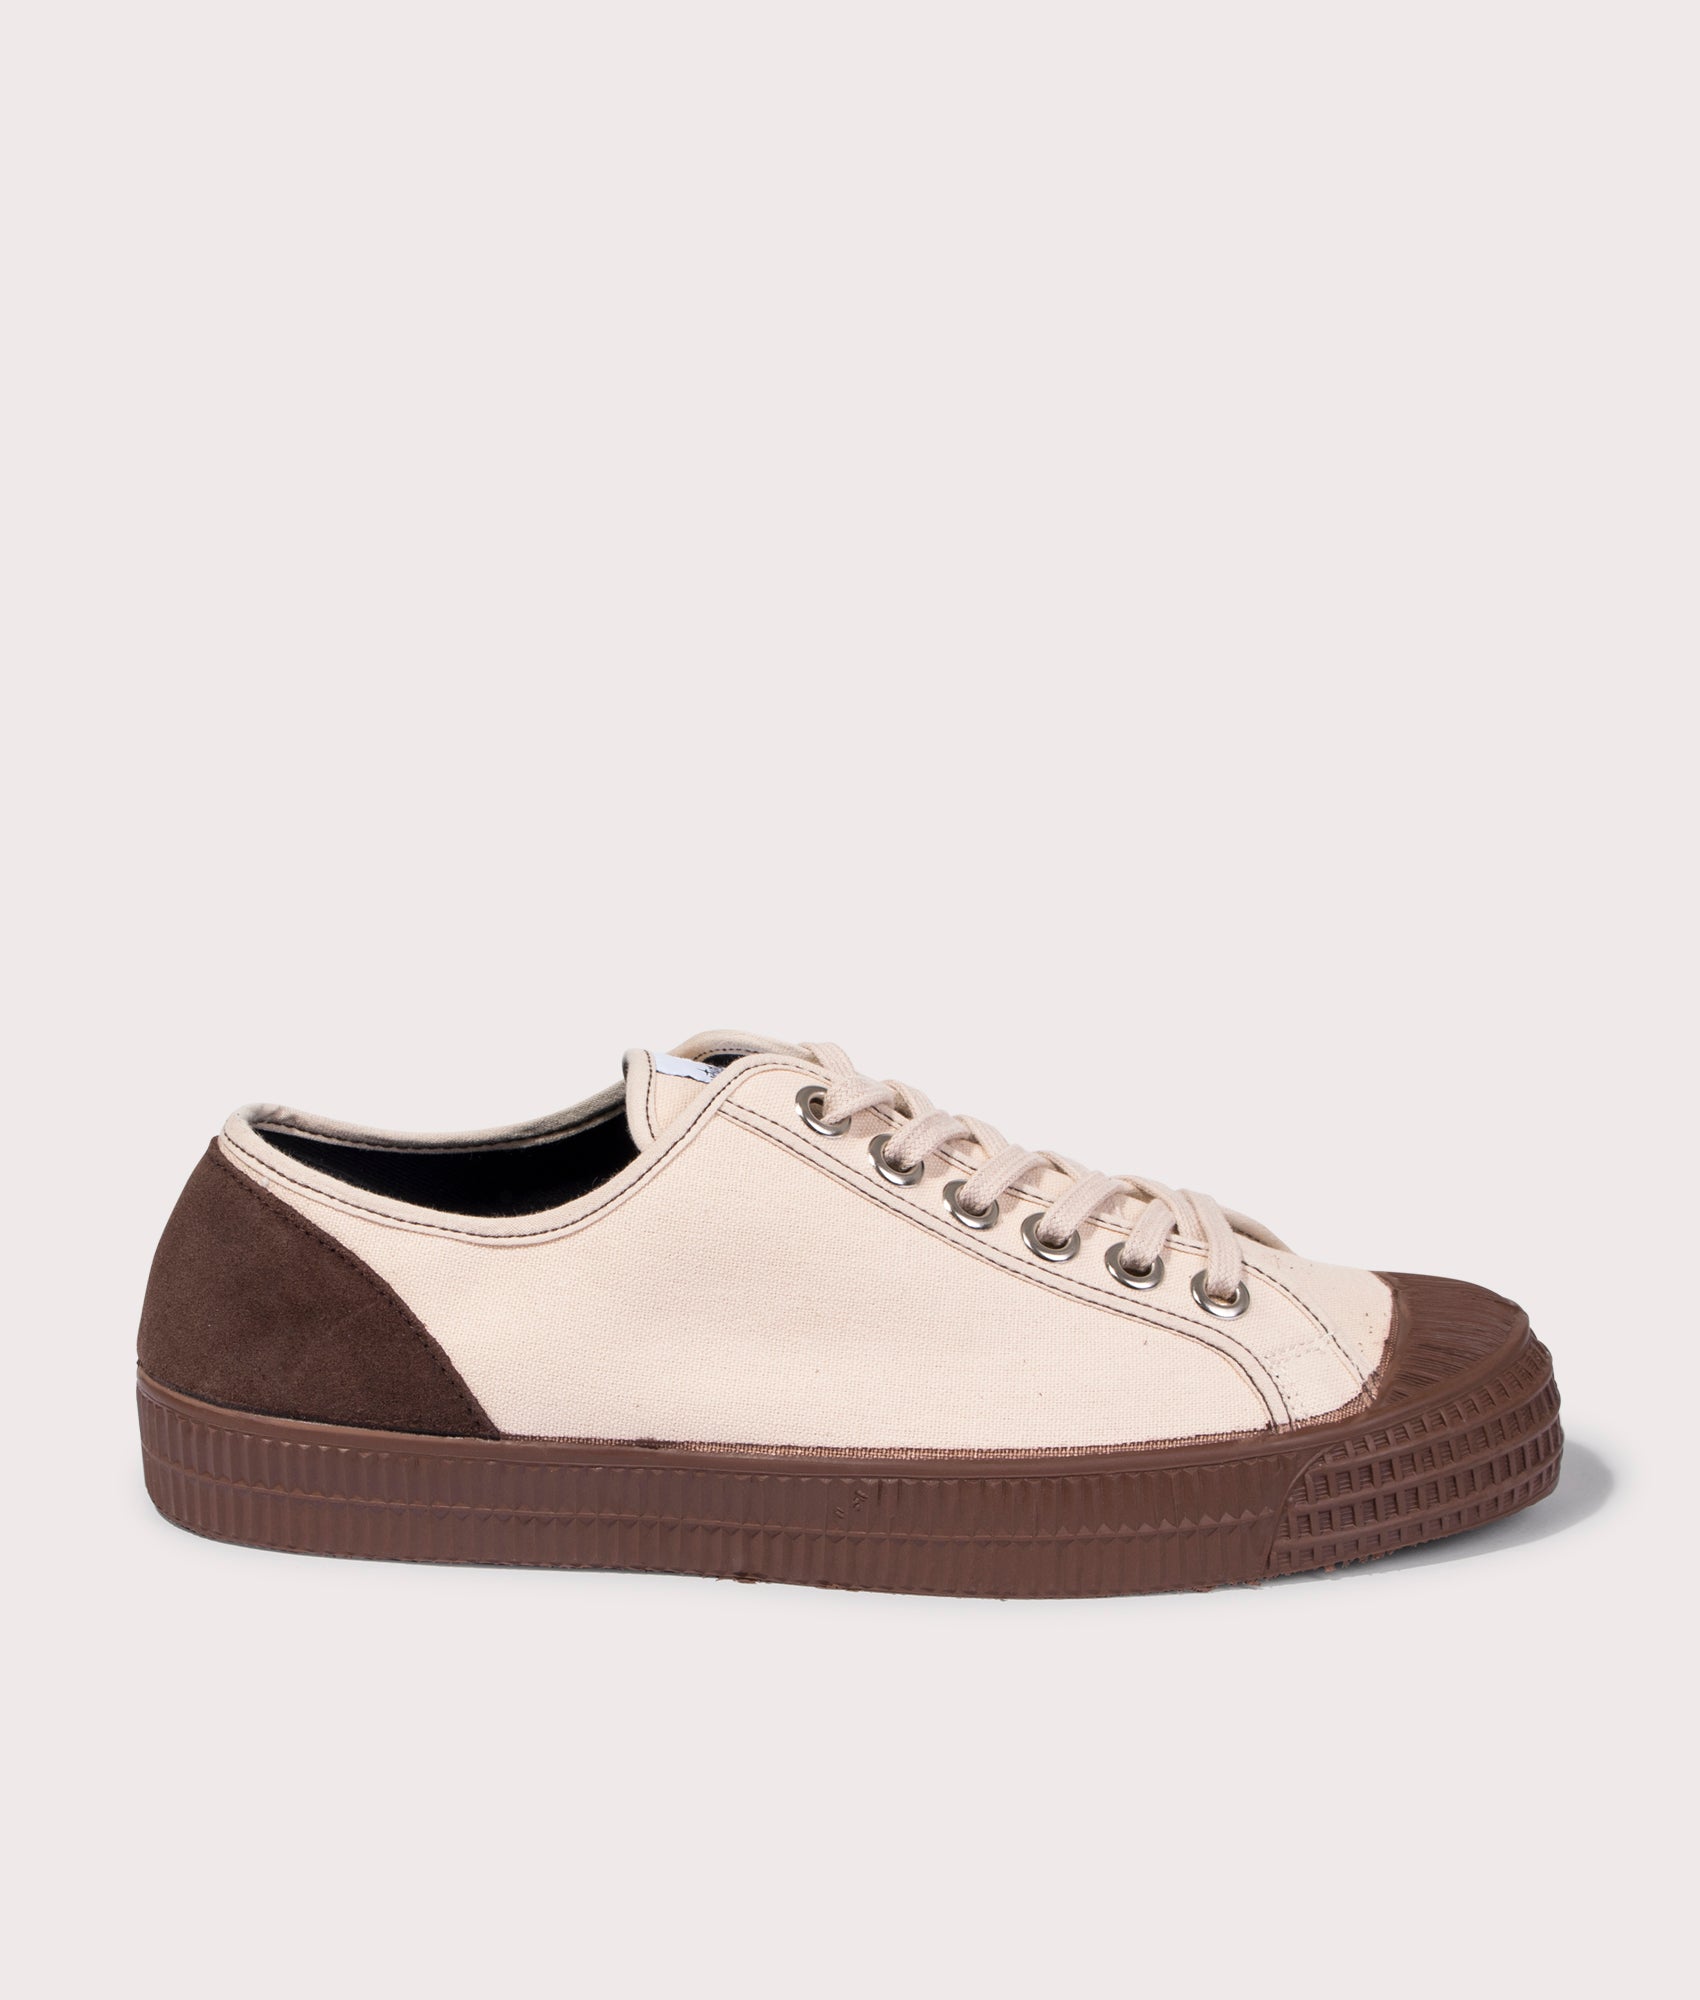 Novesta Mens Star Master Canvas x Suede Sneakers - Colour: Ivory/Brown - Size: 10